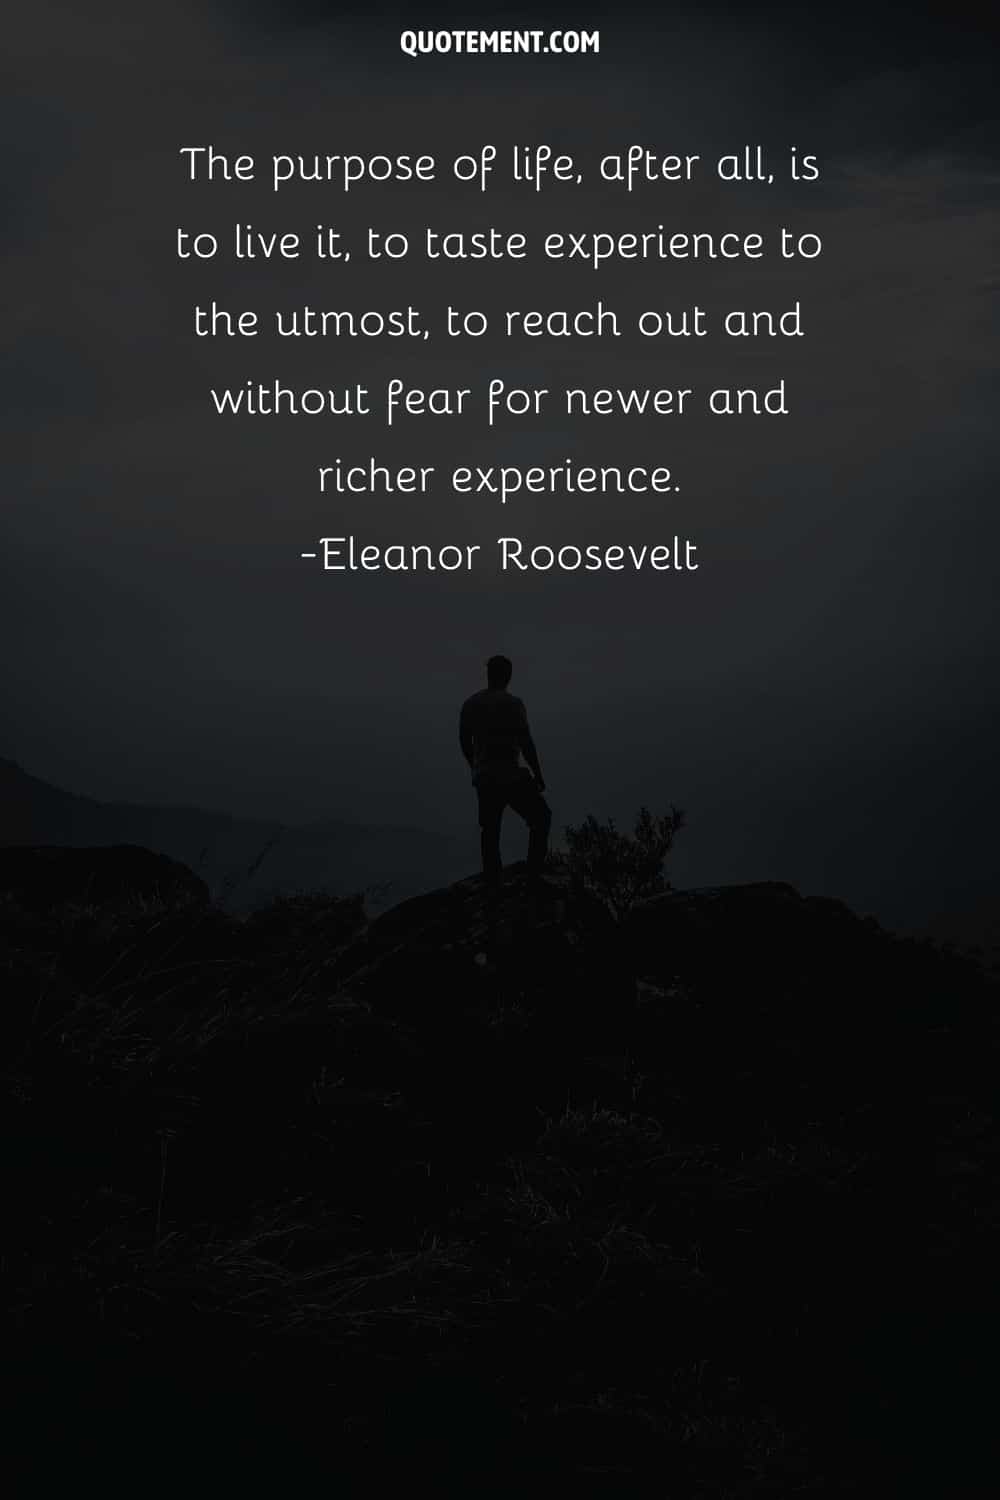 The purpose of life, after all, is to live it, to taste experience to the utmost, to reach out and without fear for newer and richer experience